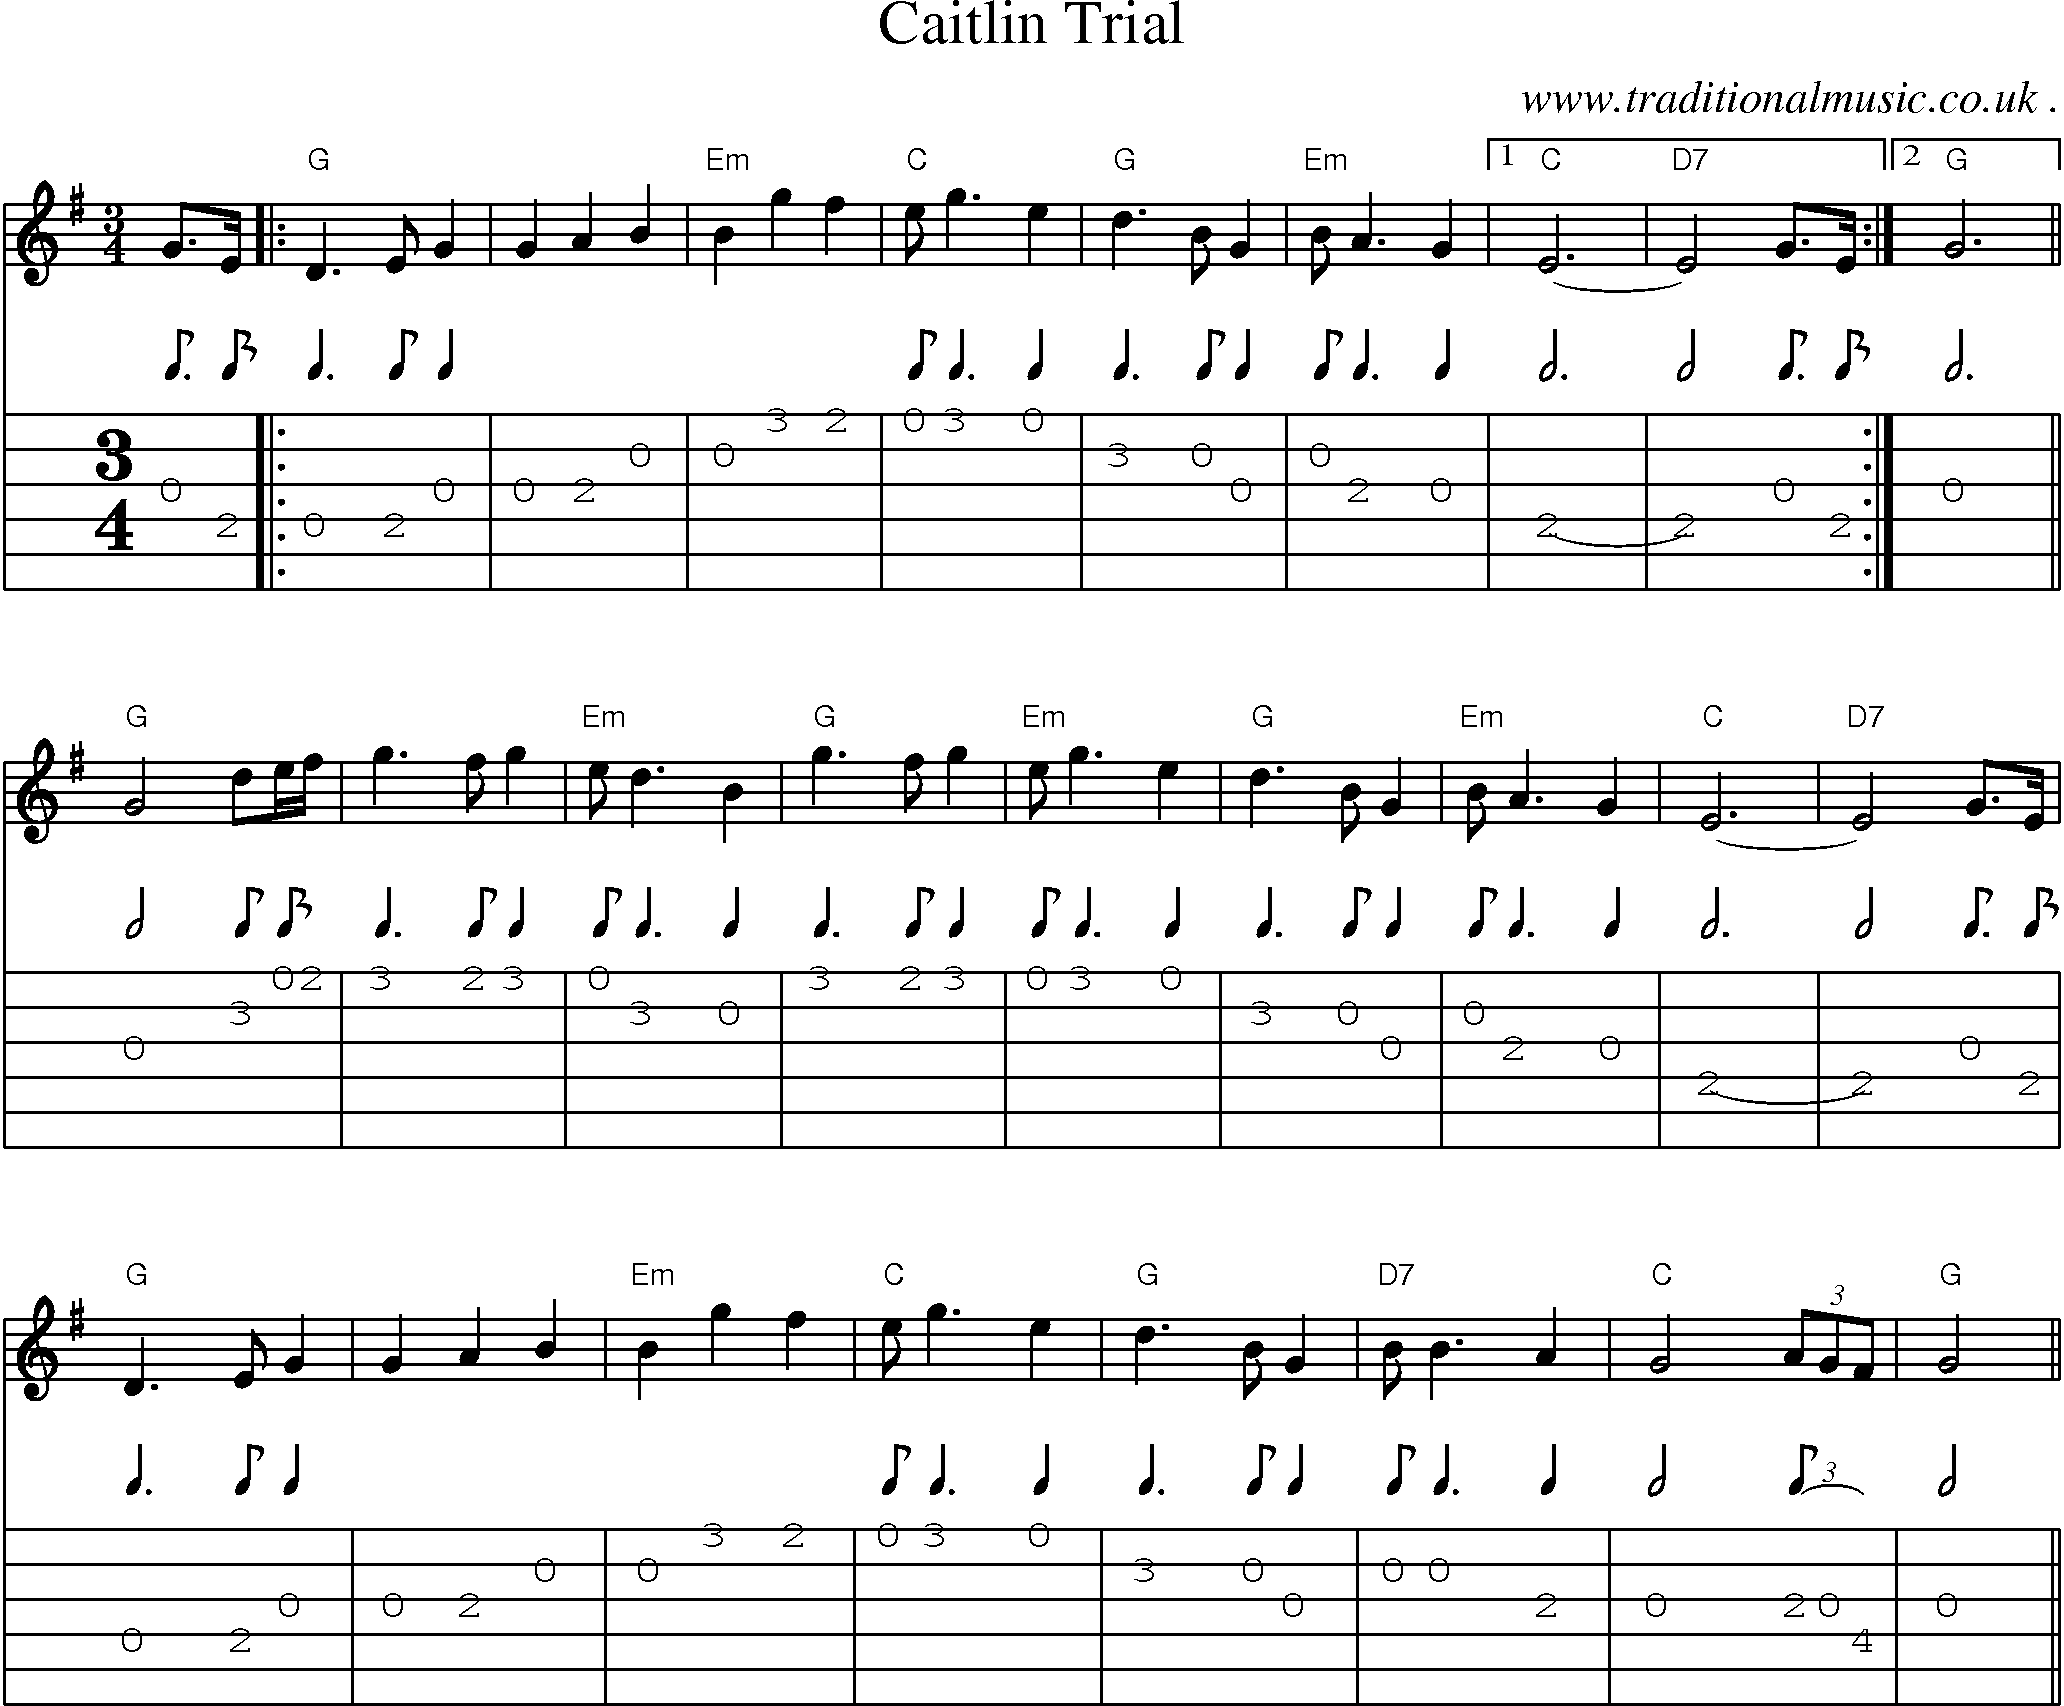 Music Score and Guitar Tabs for Caitlin Trial